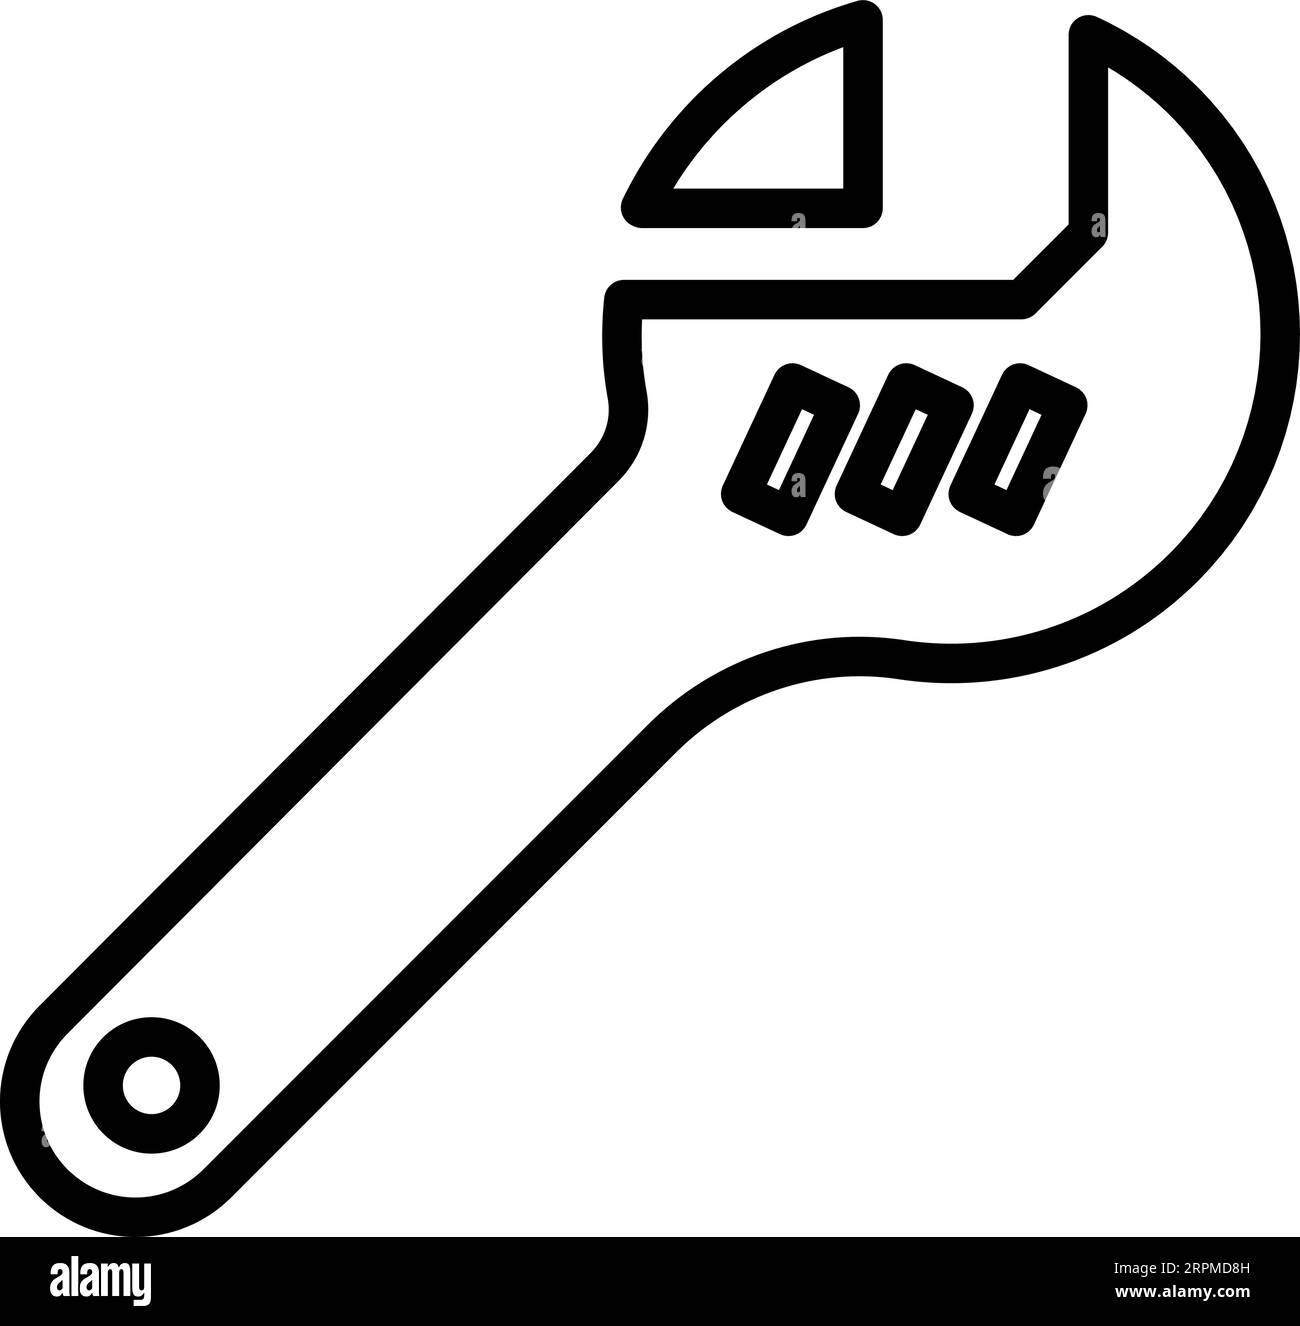 Line monkey wrench icon for your design Stock Vector